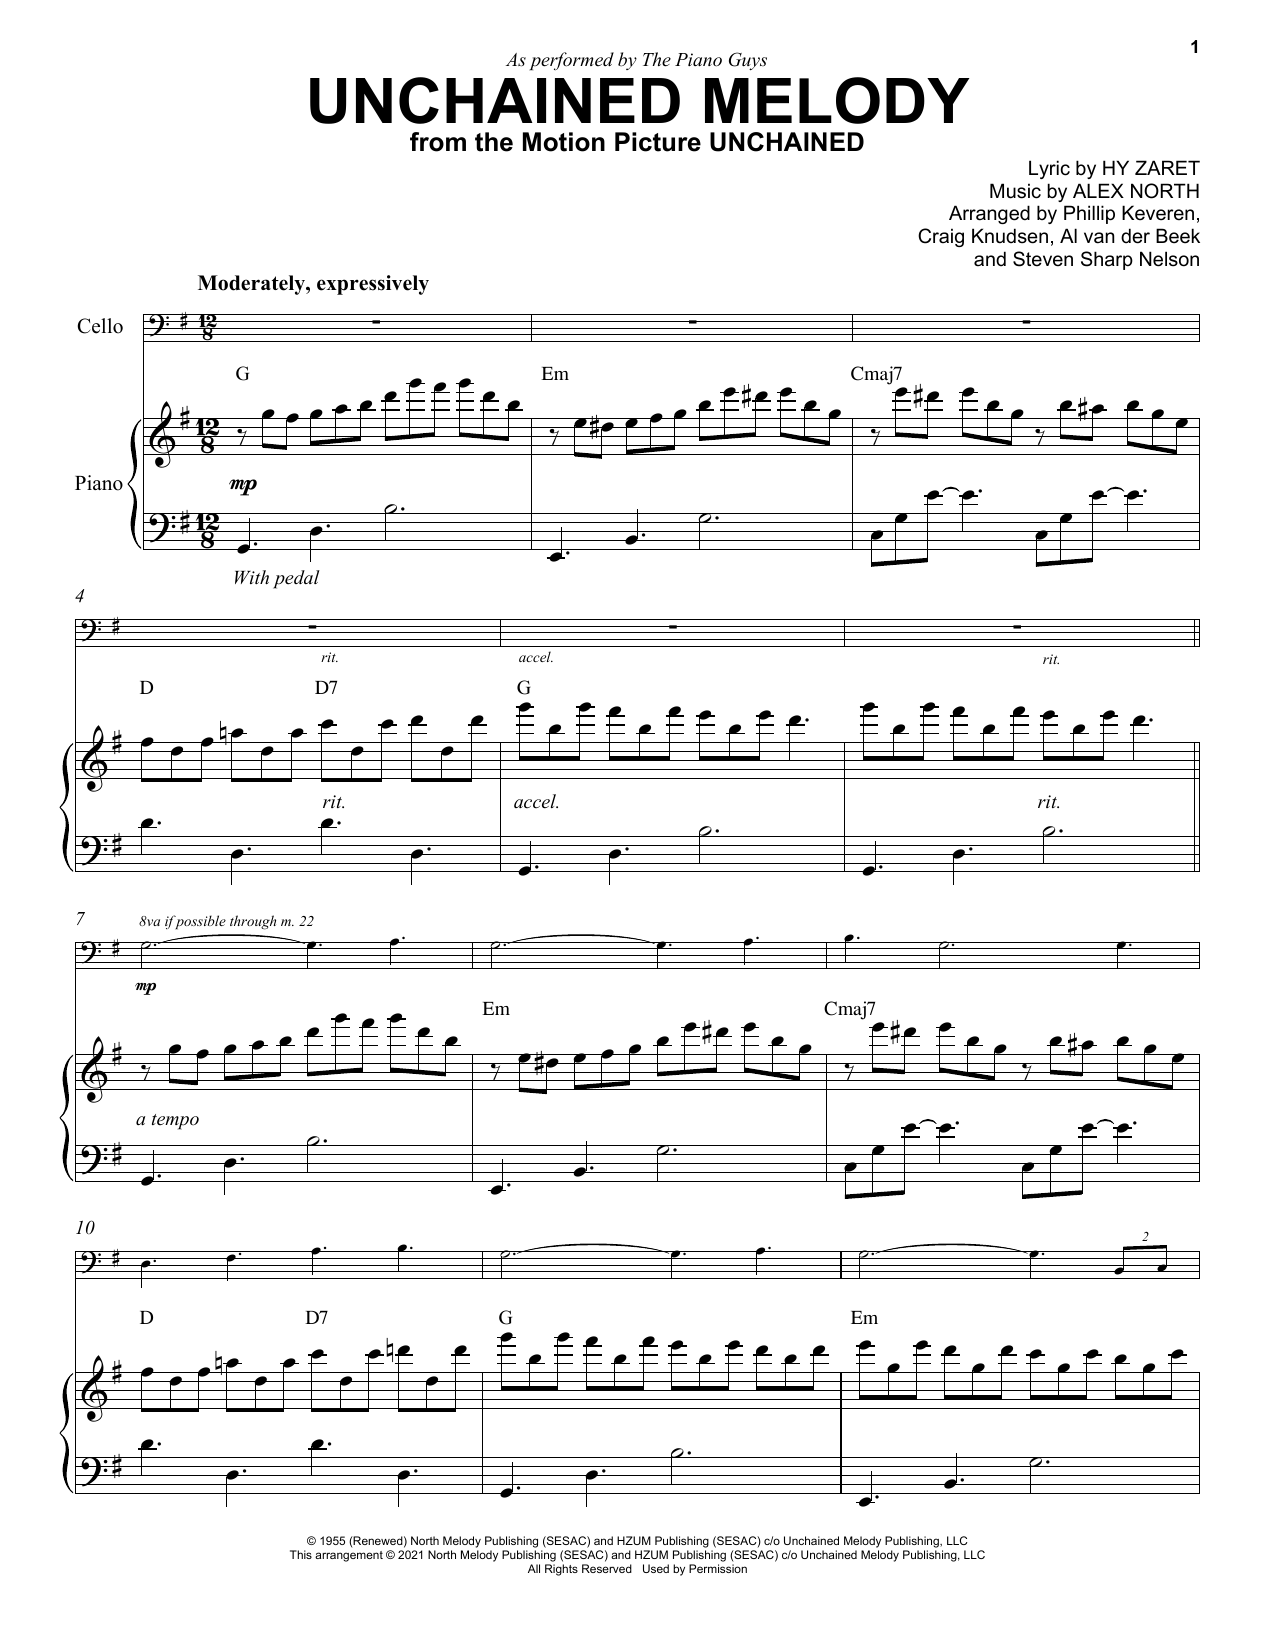 Download The Piano Guys Unchained Melody Sheet Music